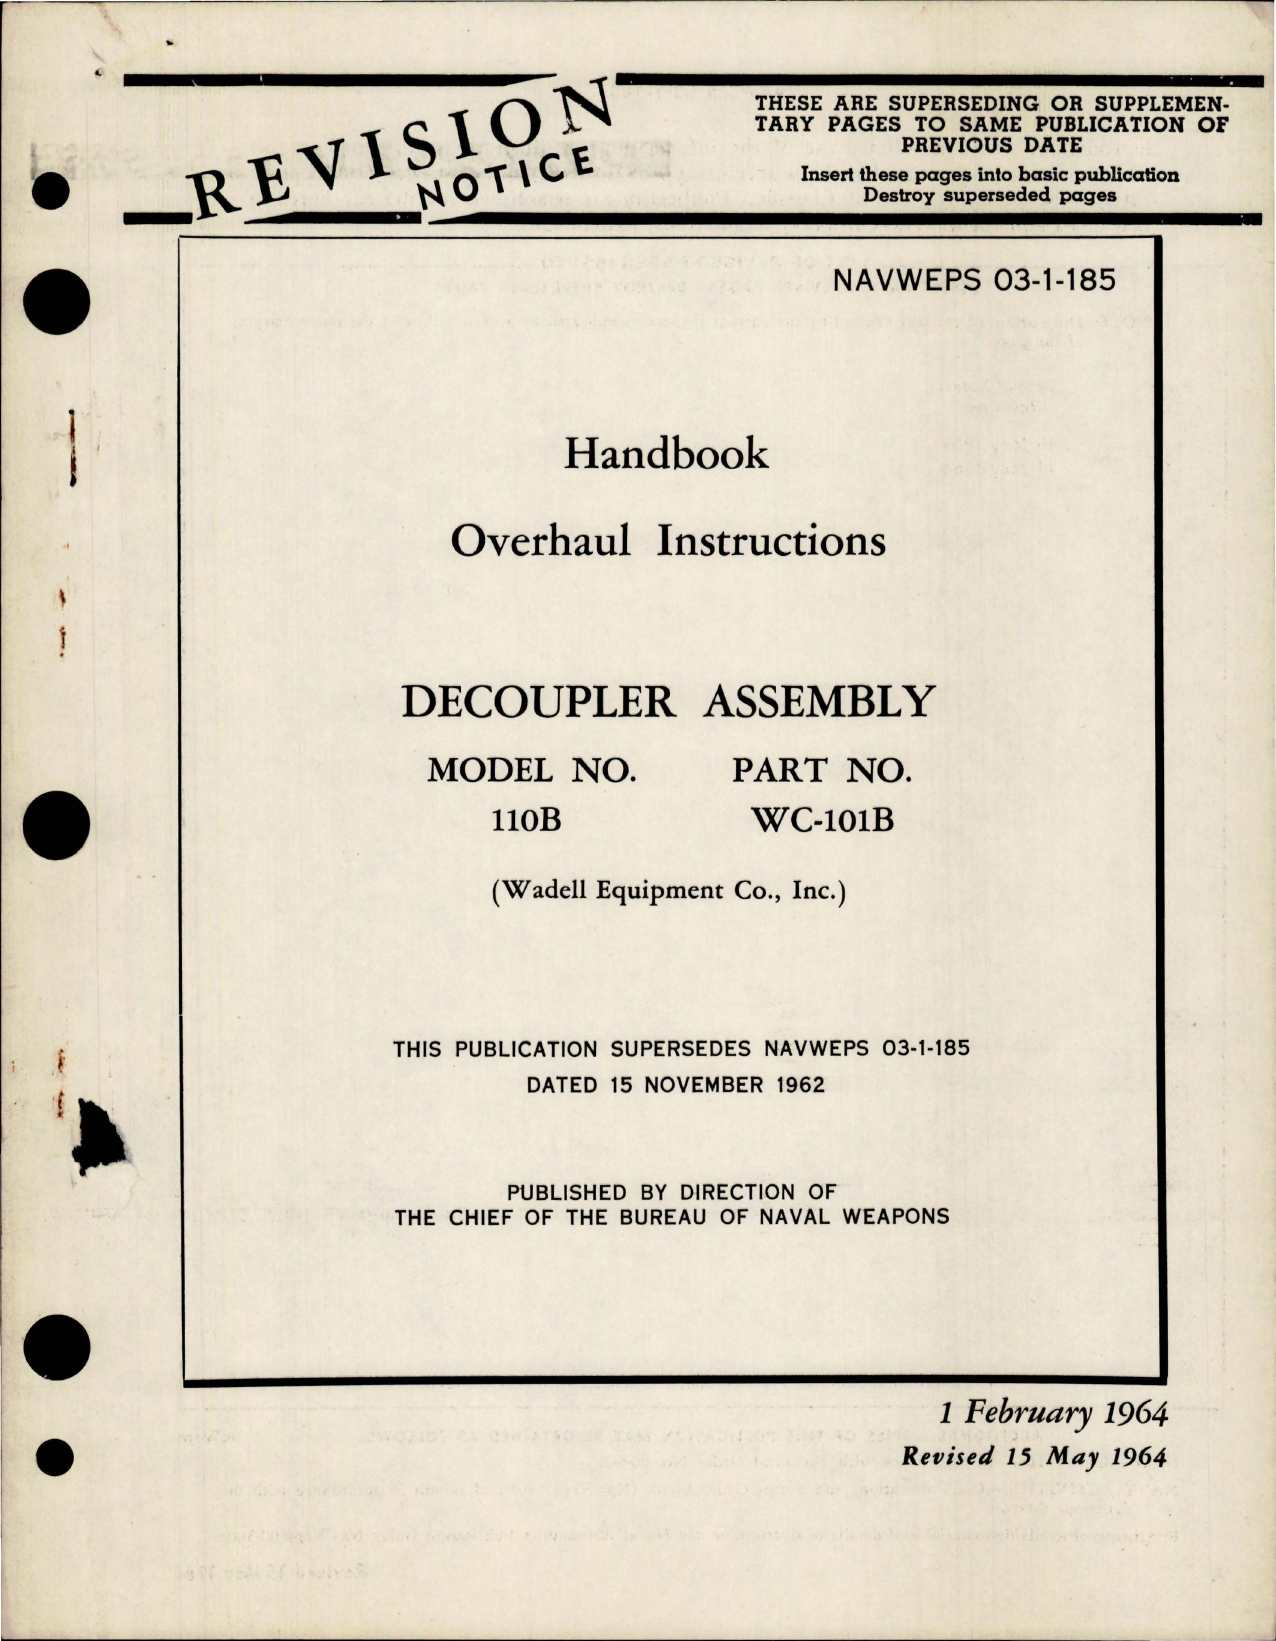 Sample page 1 from AirCorps Library document: Overhaul Instructions for Decoupler Assembly - Model 110B - Part WC-101B